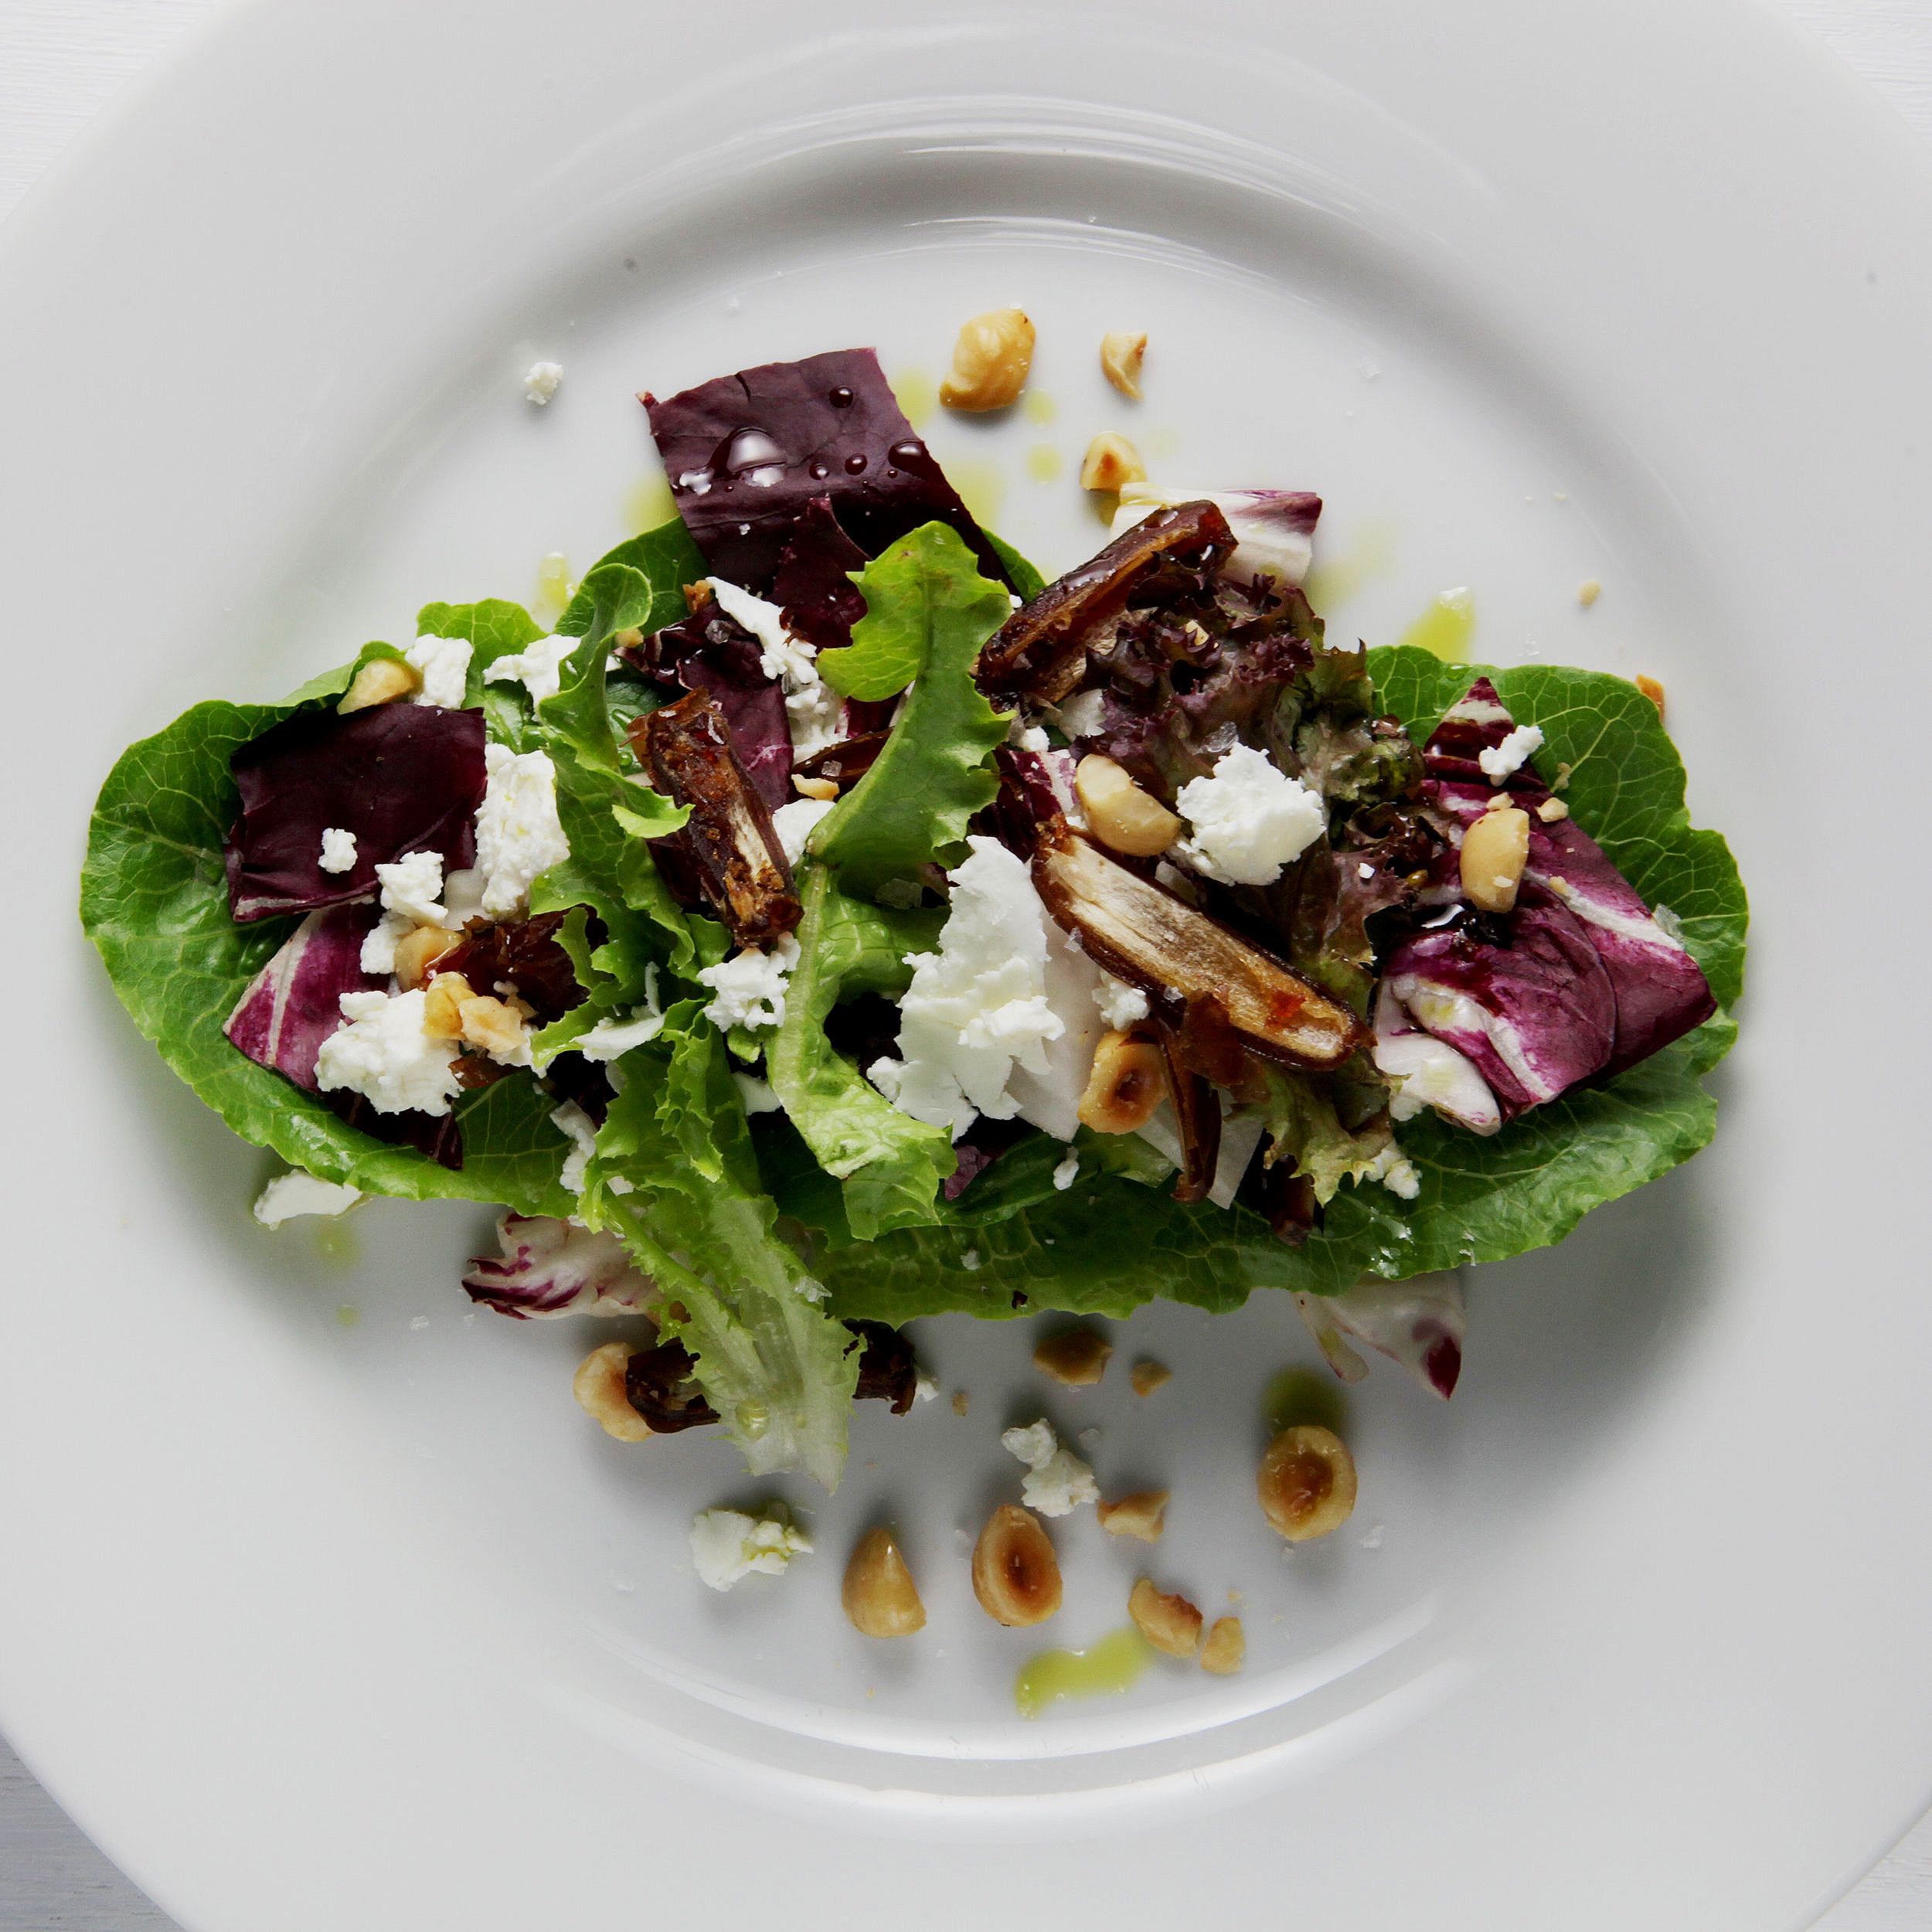 Mixed greens salad with hazelnuts and goat cheese